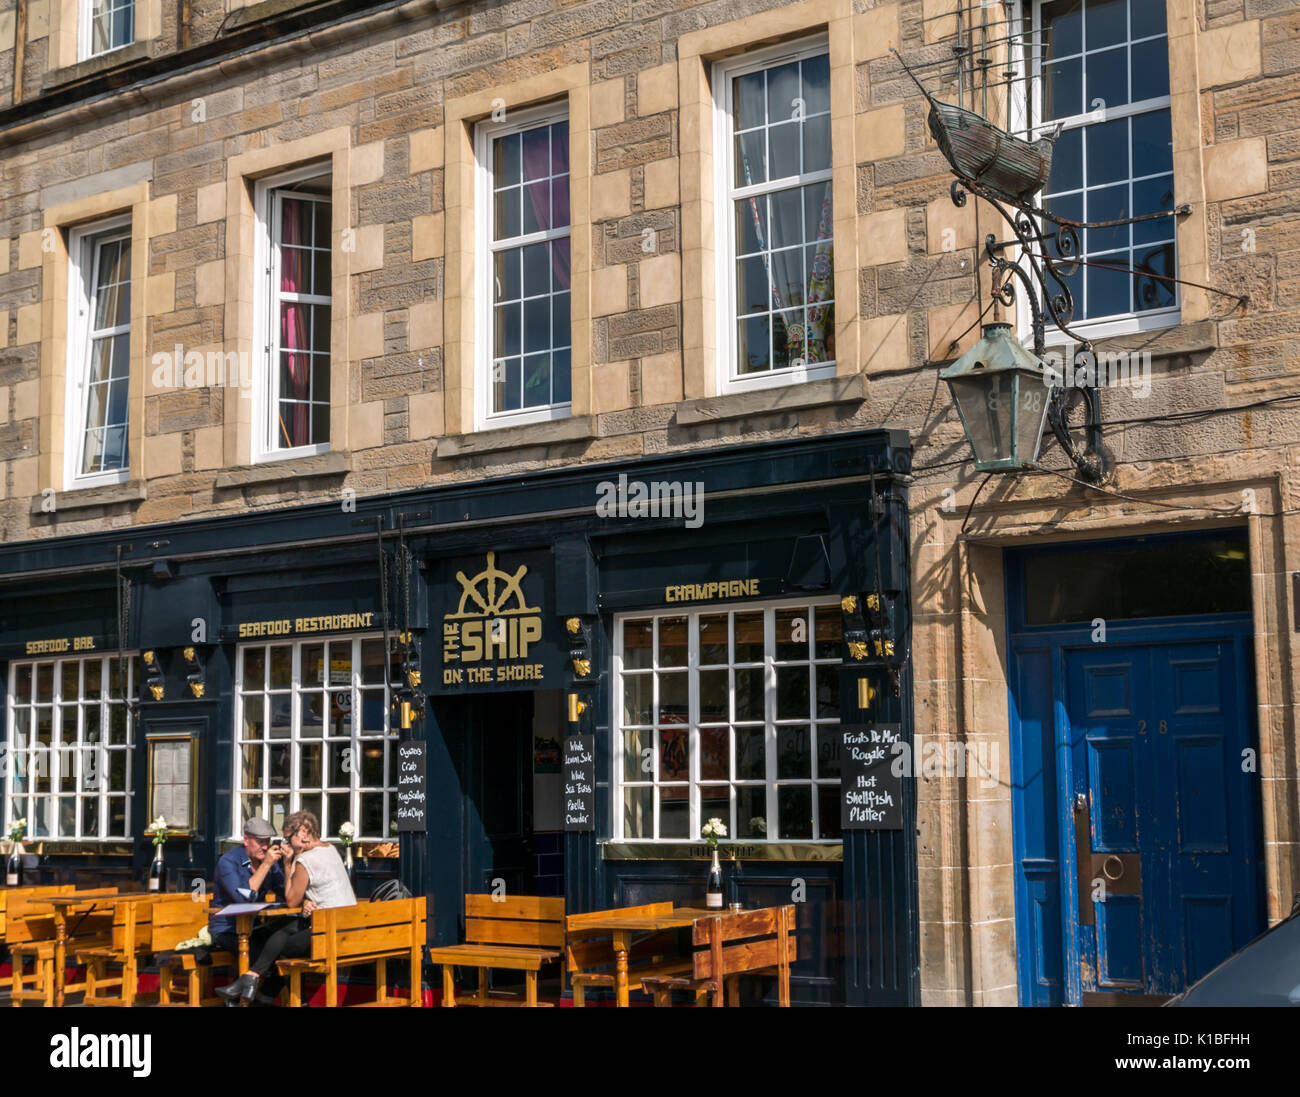 Leith restaurant, The Ship on the Shore, with Persevere ship model emblem on wall and couple sitting outside in sun, Edinburgh, Scotland, UK Stock Photo